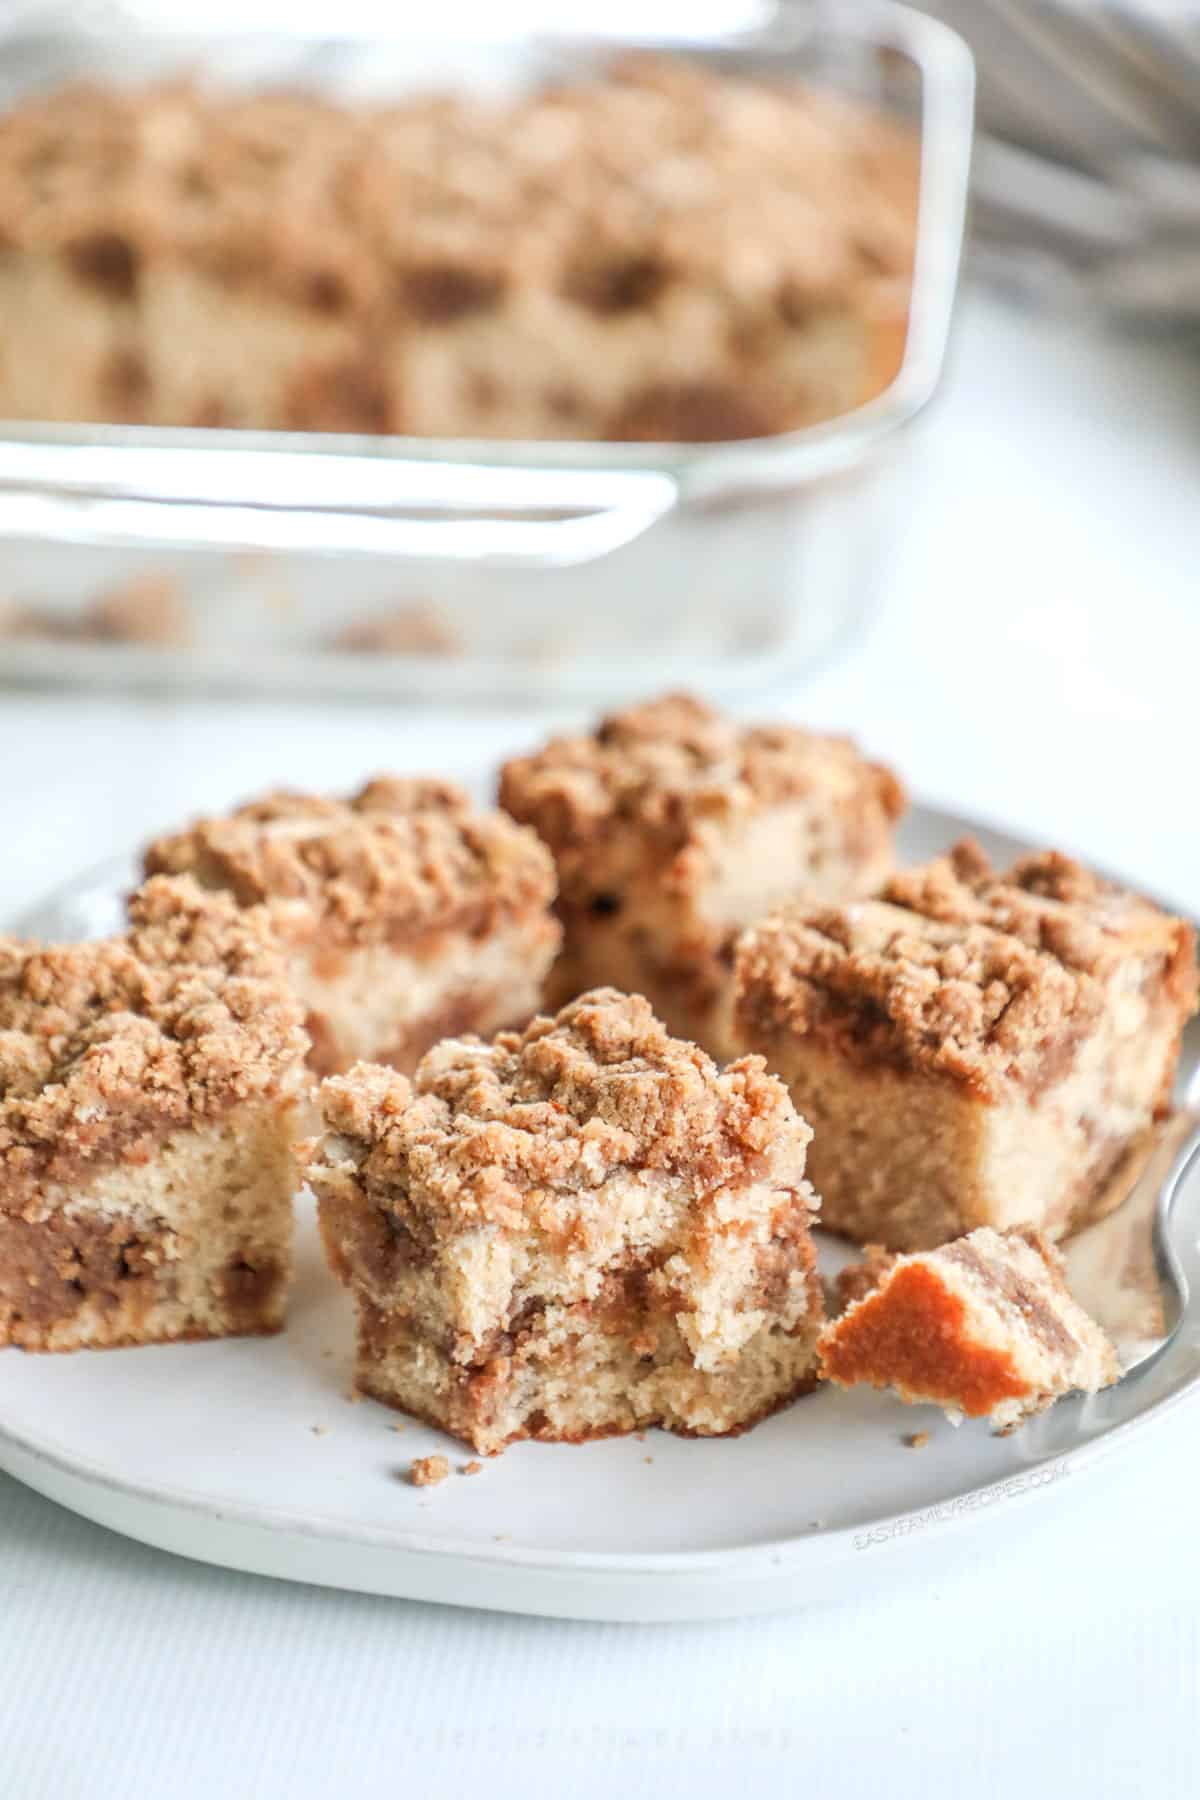 Cinnamon Crumble Coffee Cake on a plate, ready to serve.